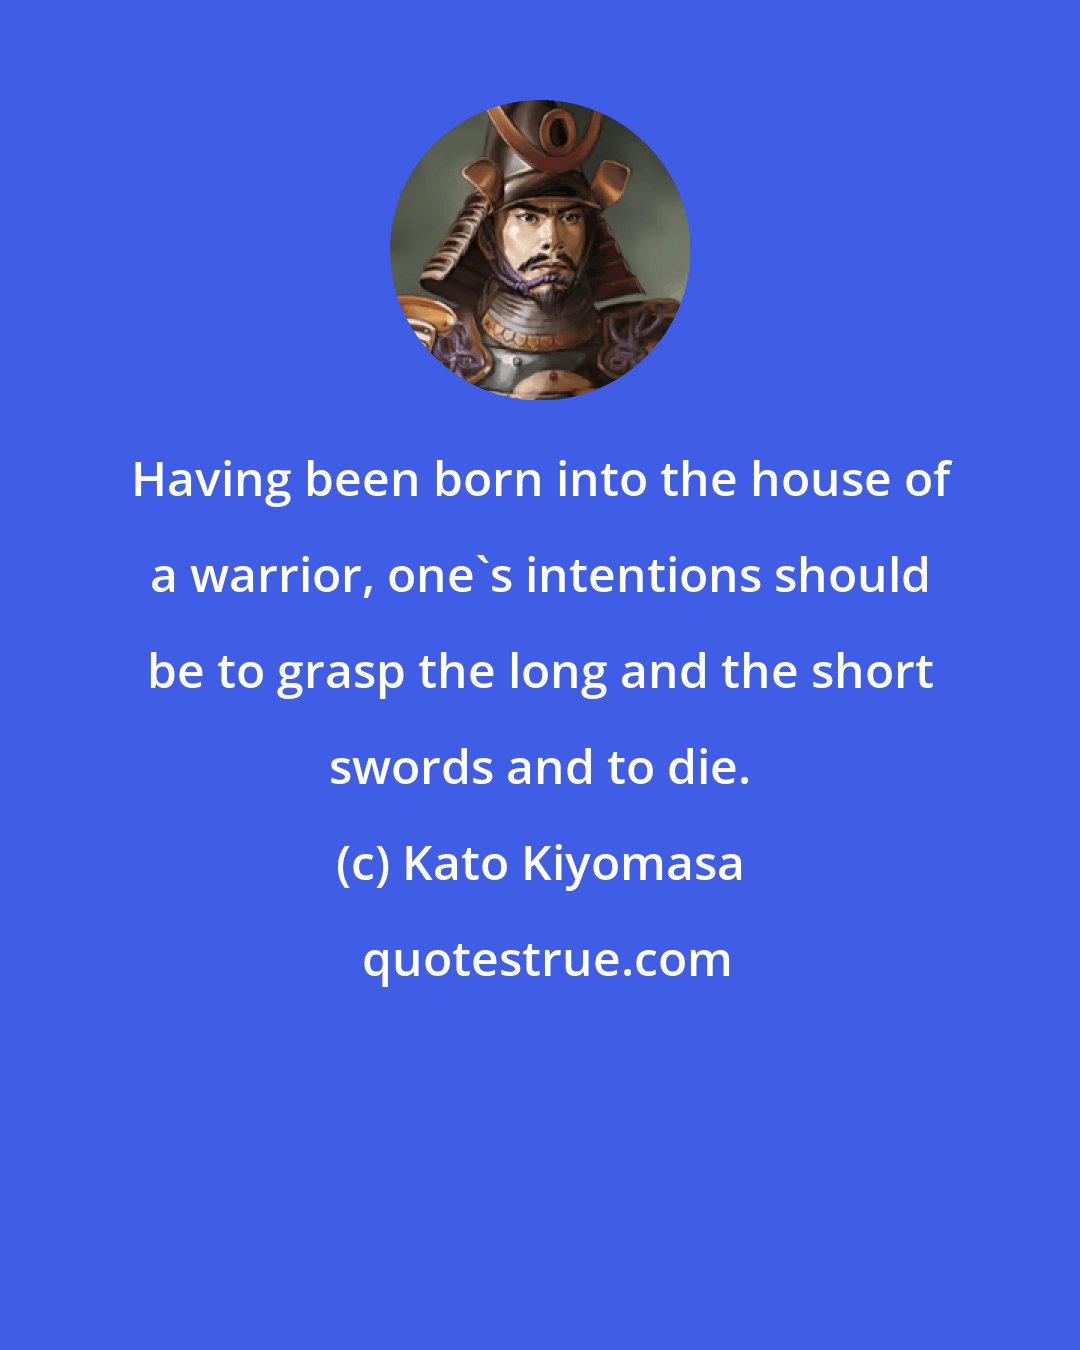 Kato Kiyomasa: Having been born into the house of a warrior, one's intentions should be to grasp the long and the short swords and to die.